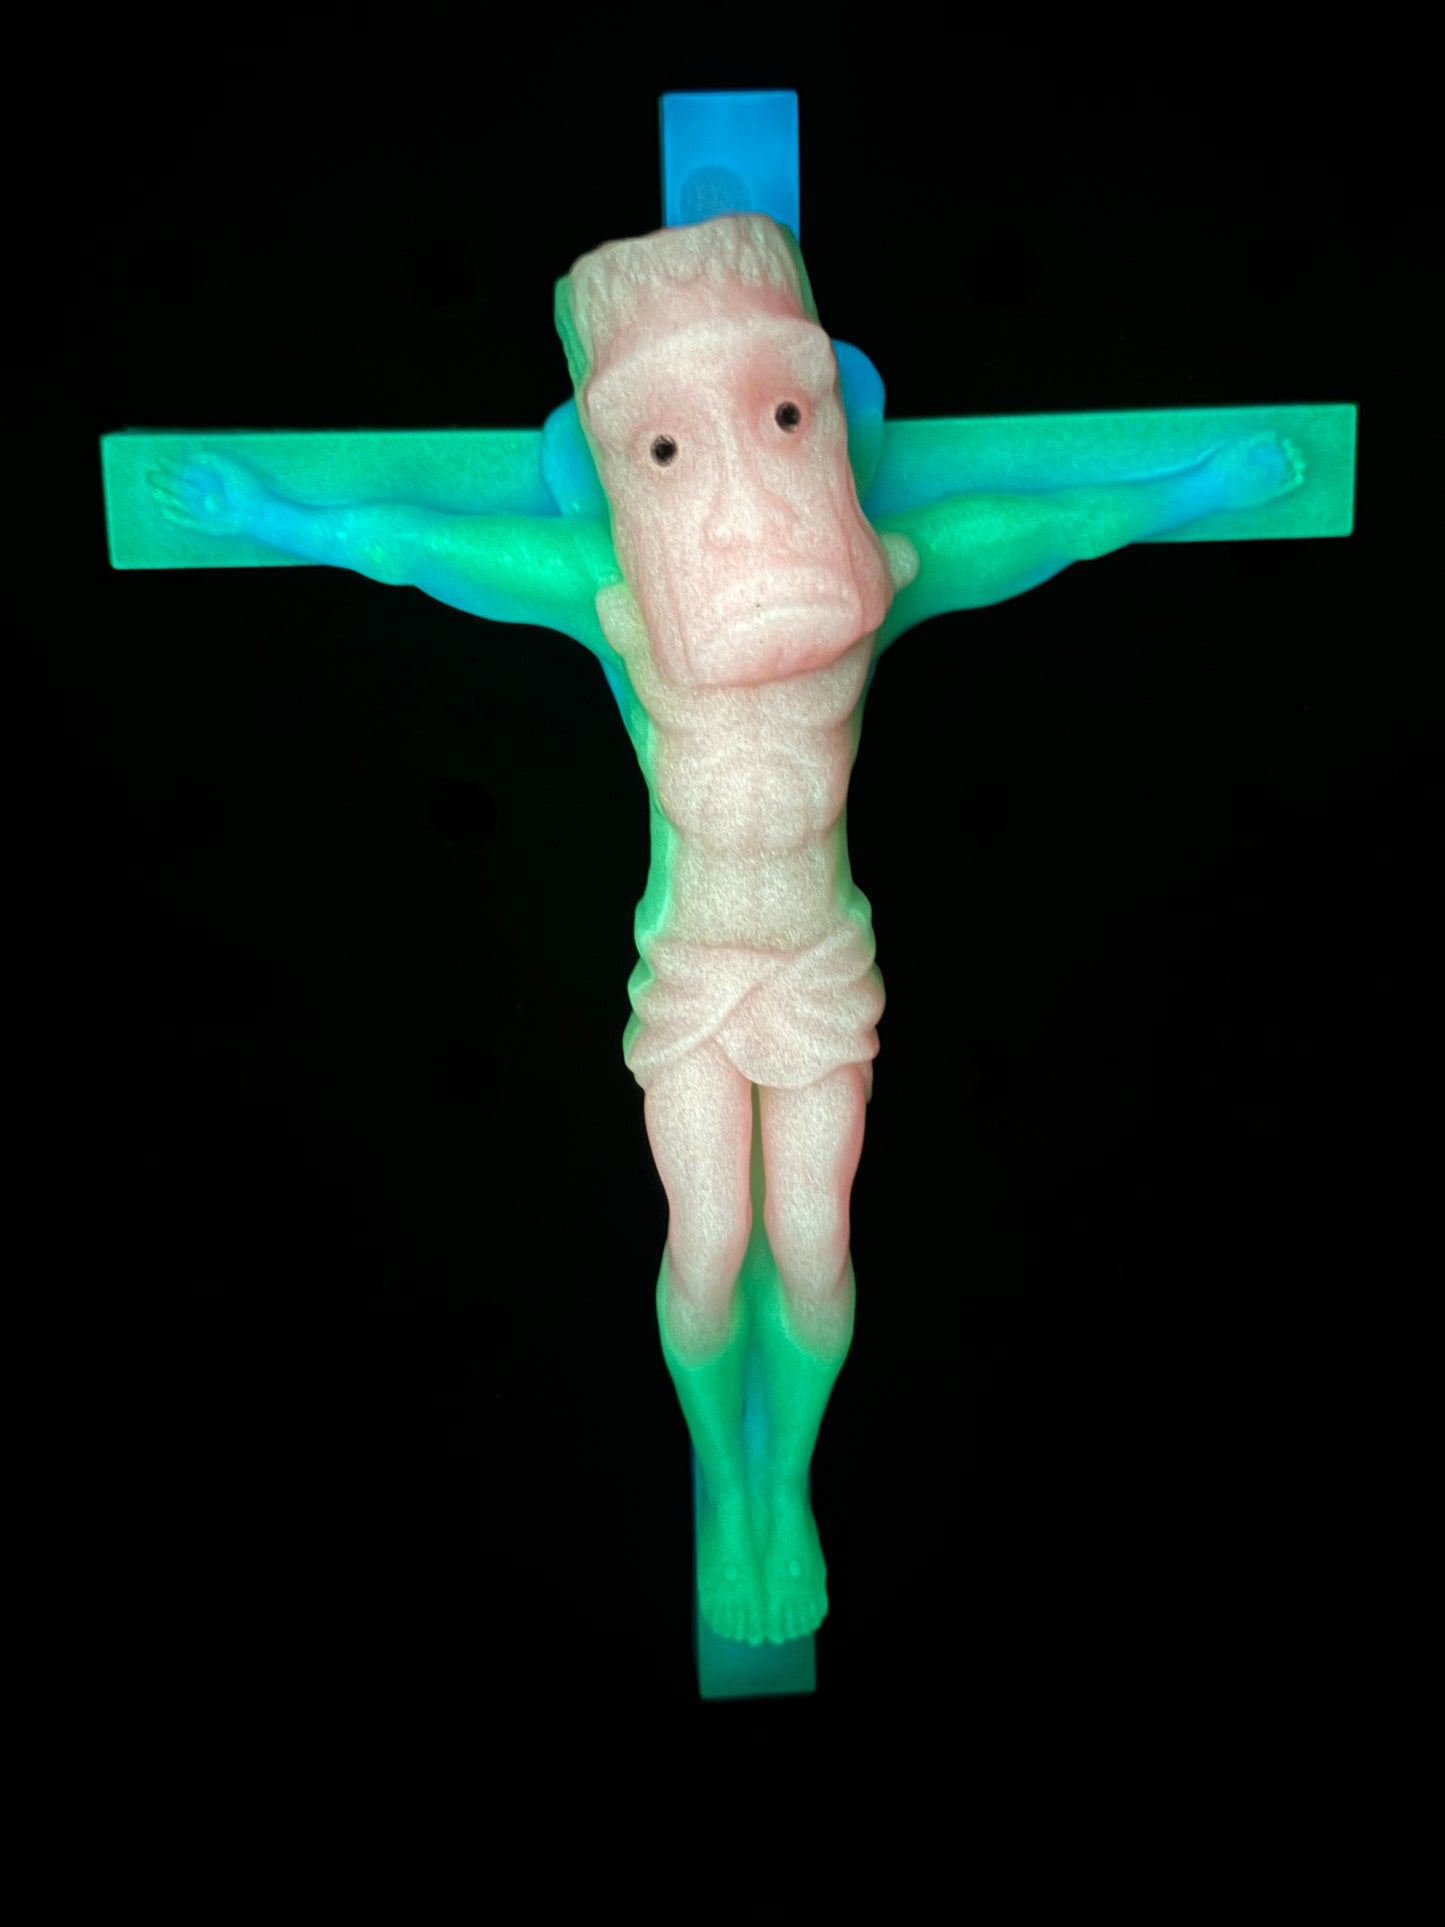 Christ on the Cross but he is a Frankenstein Monster: Choice